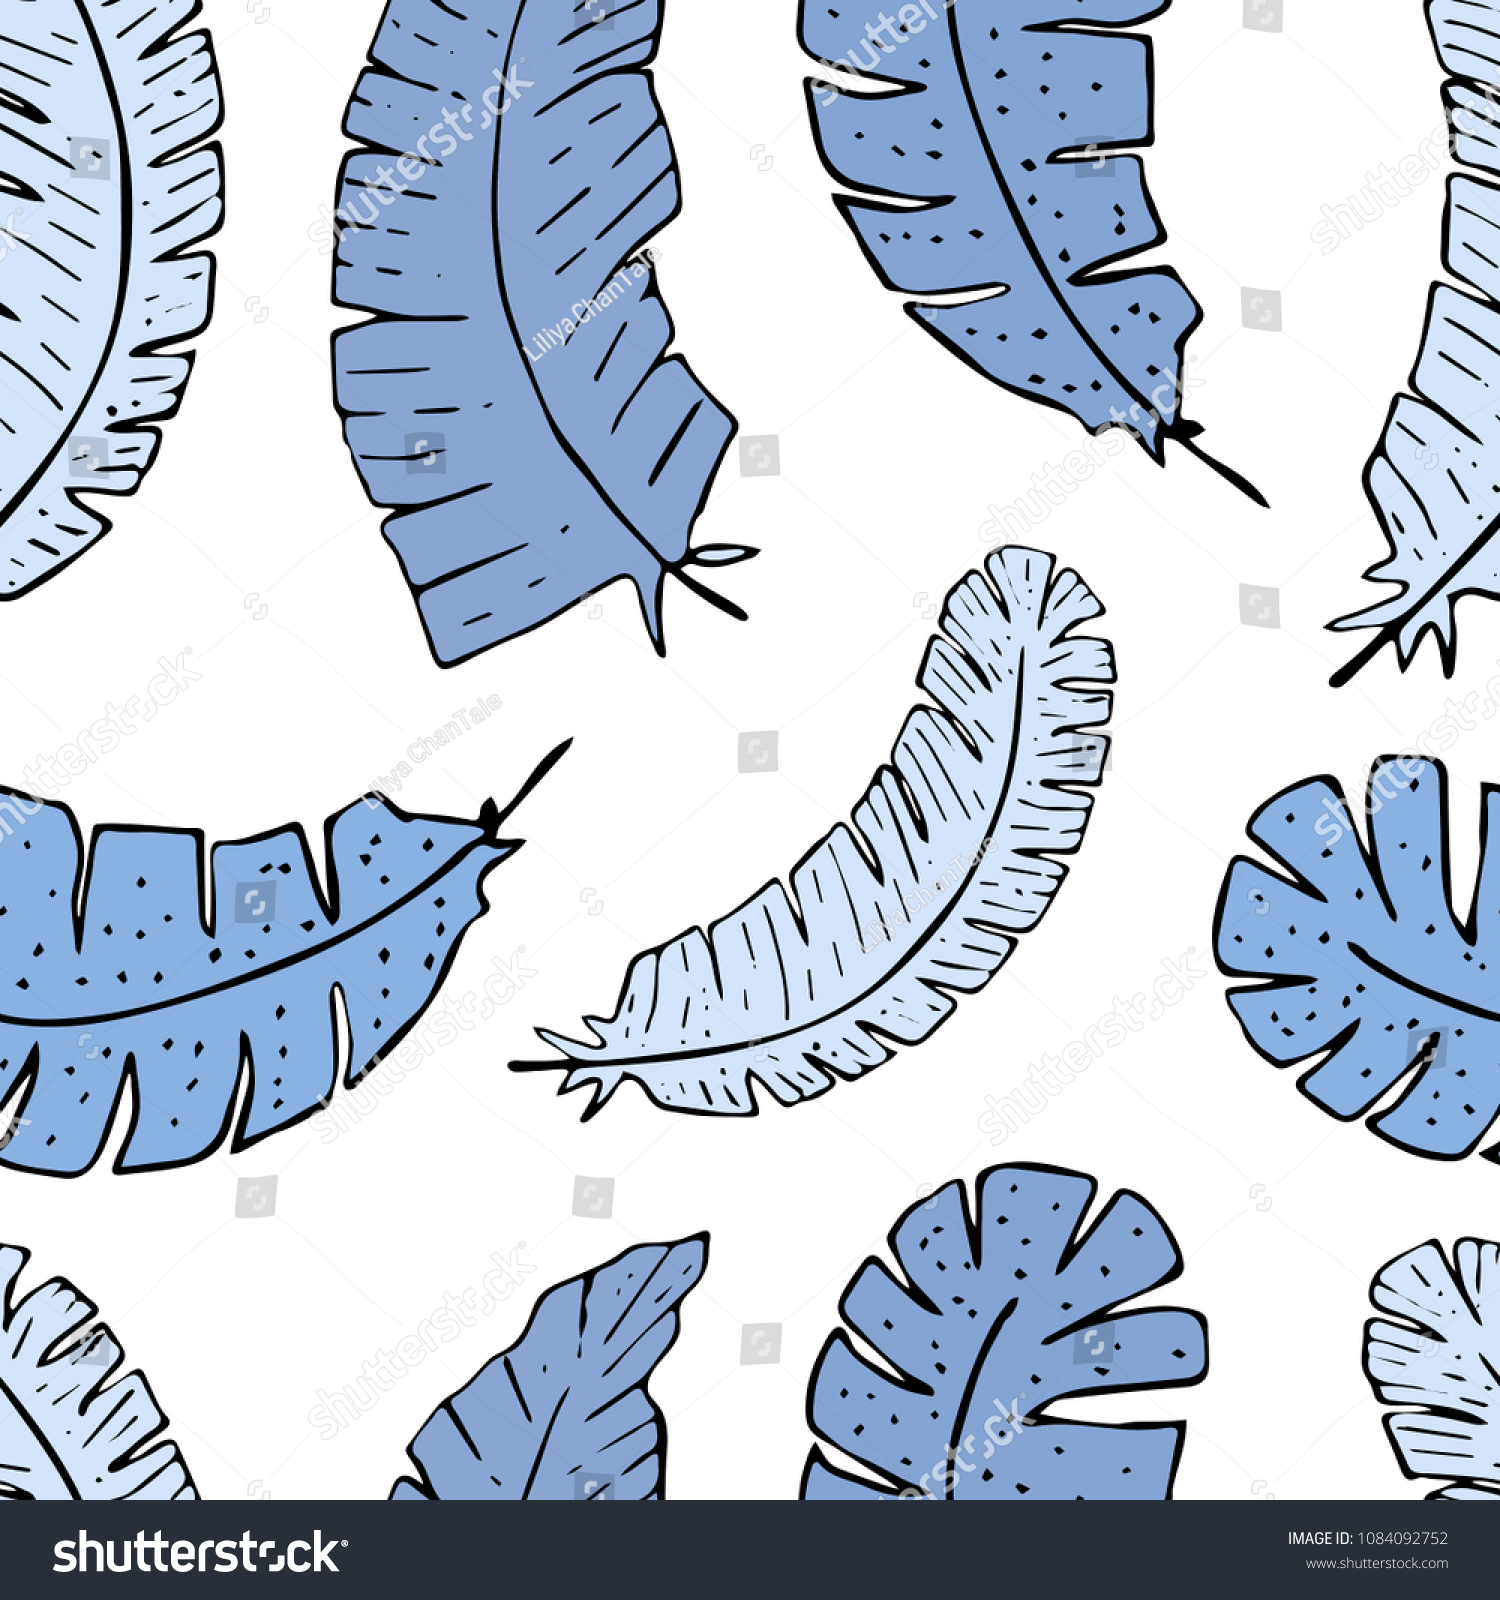 Blue Feathers On White Background Seamless Stock Vector Royalty Free Shutterstock